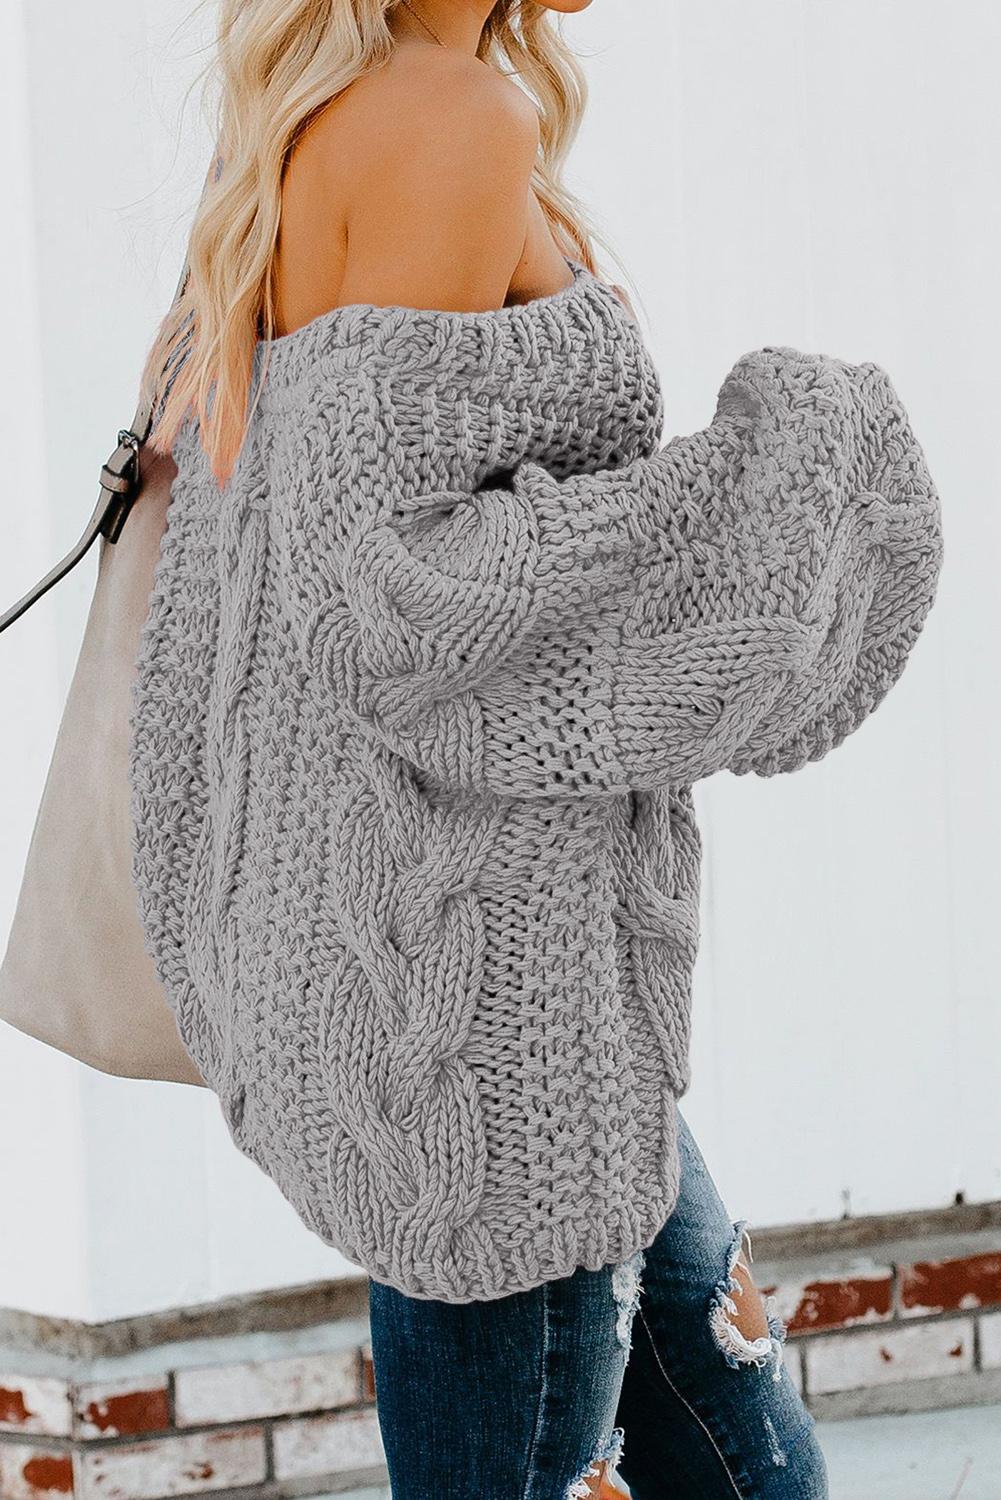 Sexy Relaxing V-Neck Braided Knit Puffy Shoulder Exposing Sweater